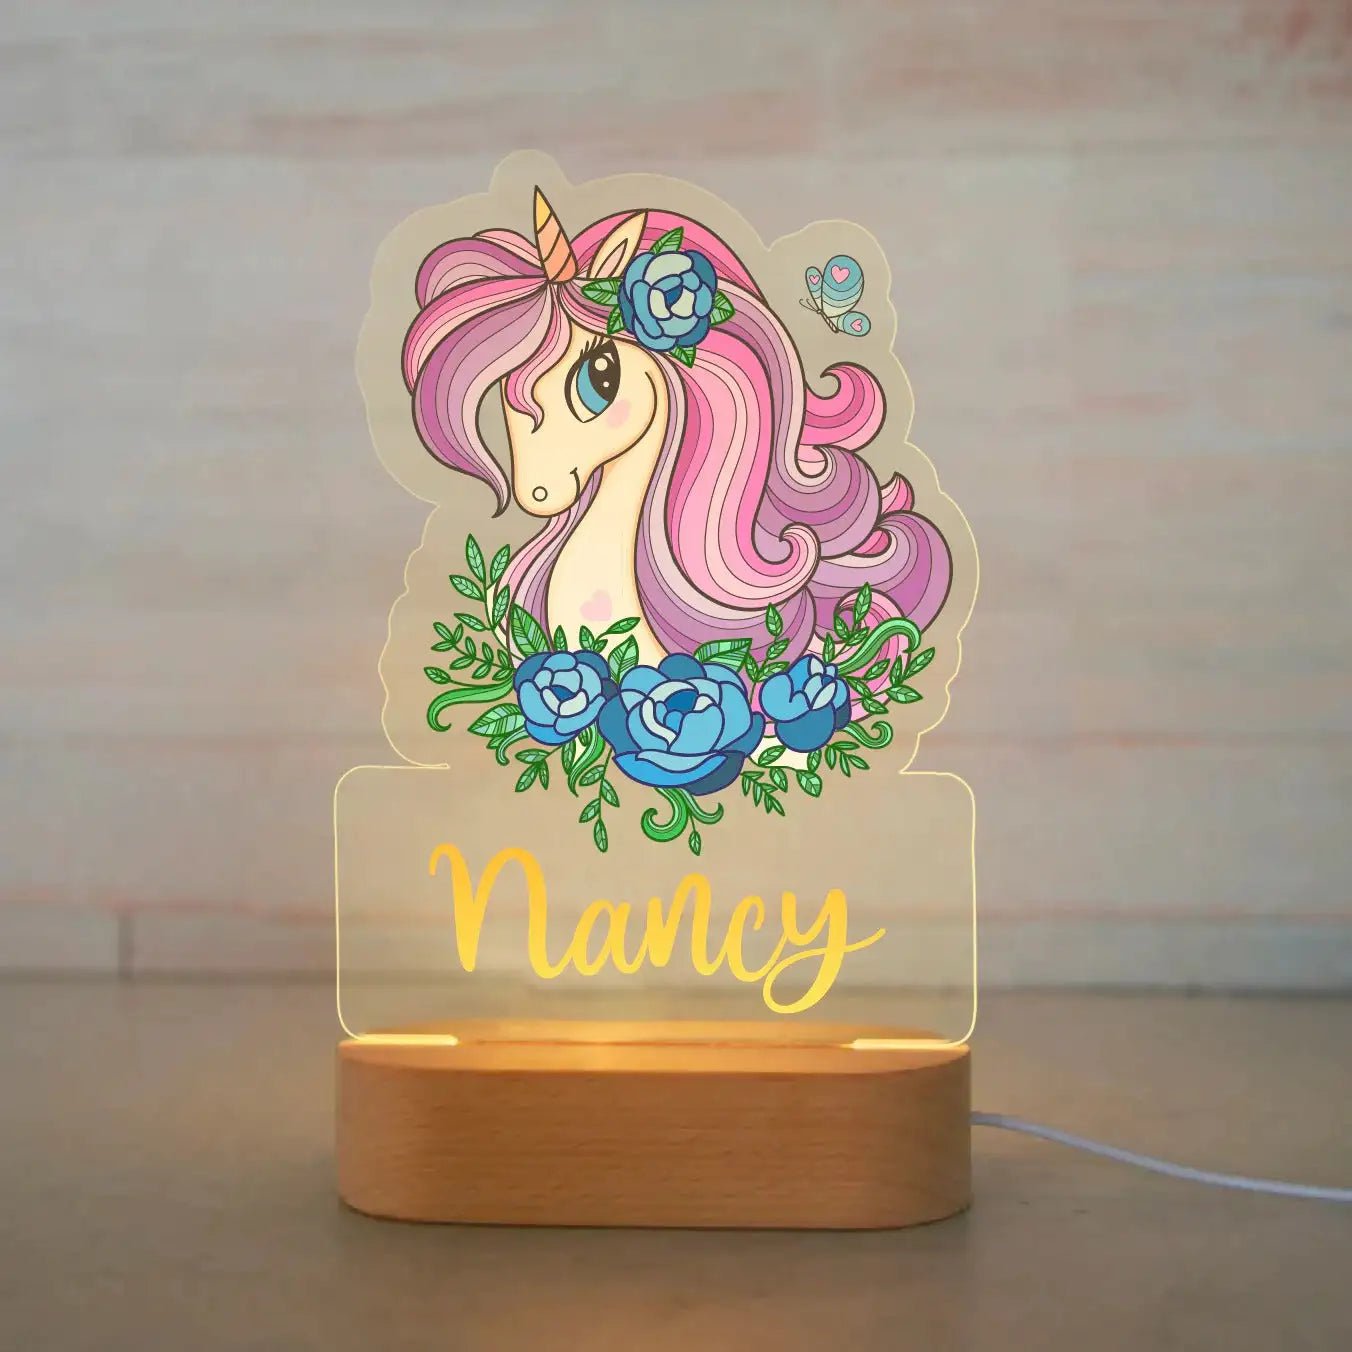 Customized Animal-themed Night Light for Kids - Personalized with Child's Name, Acrylic Lamp for Bedroom Decor Warm Light / 15Unicorn